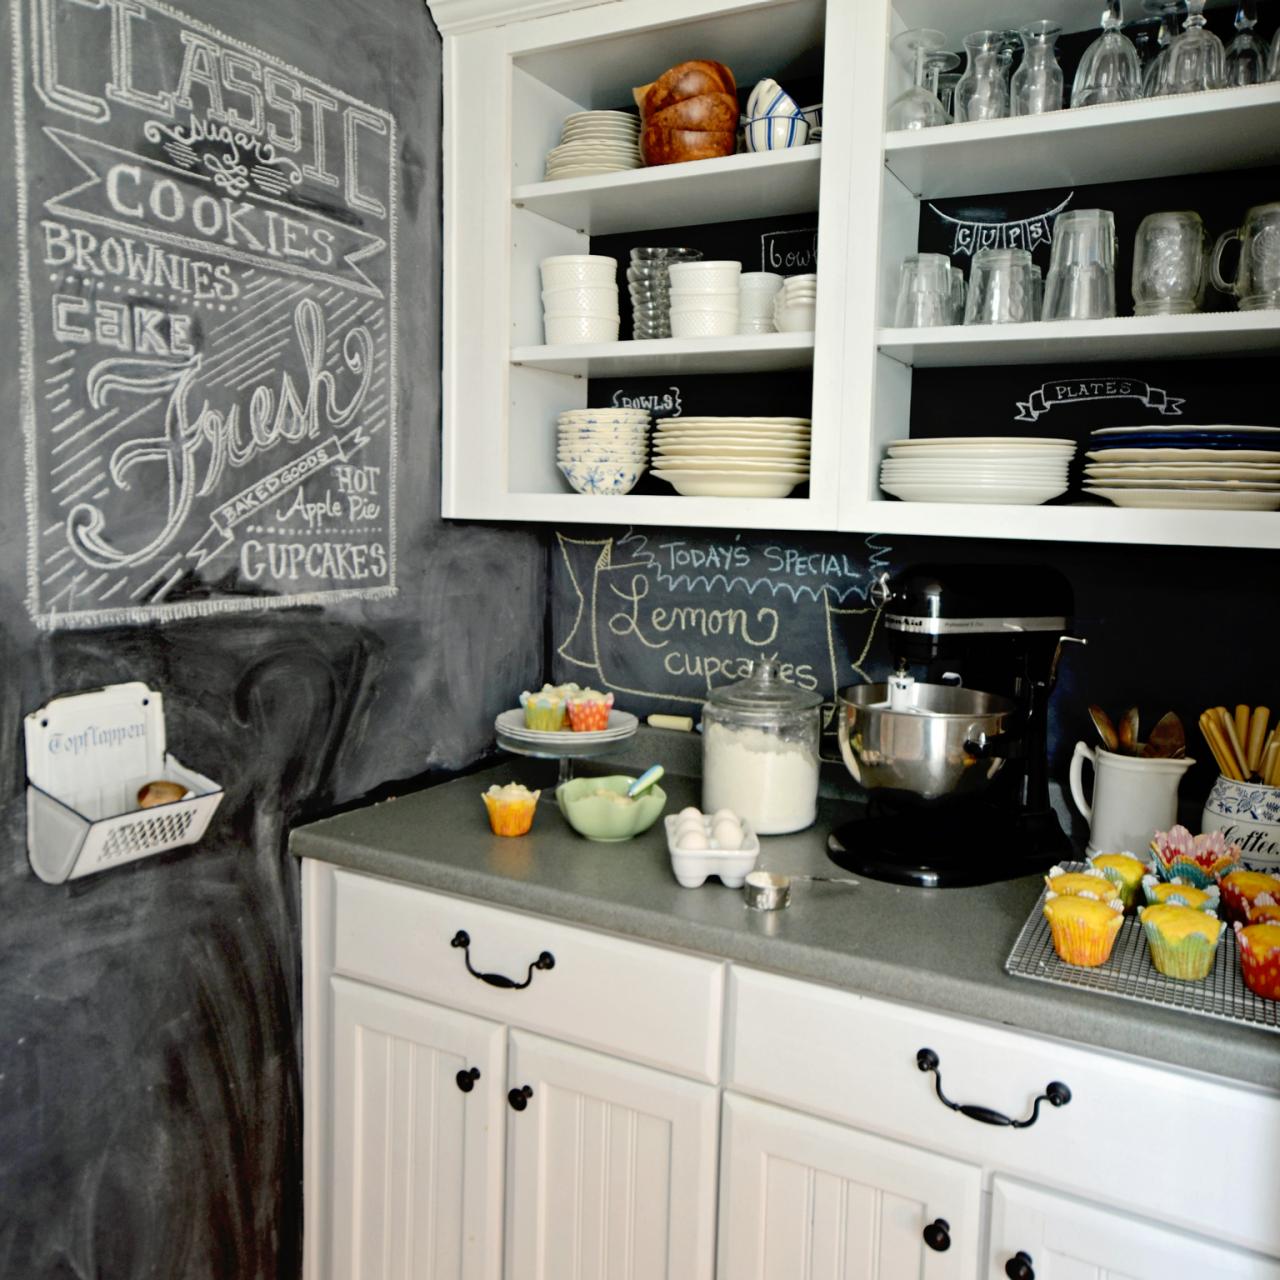 How to Paint with Chalkboard Paint 